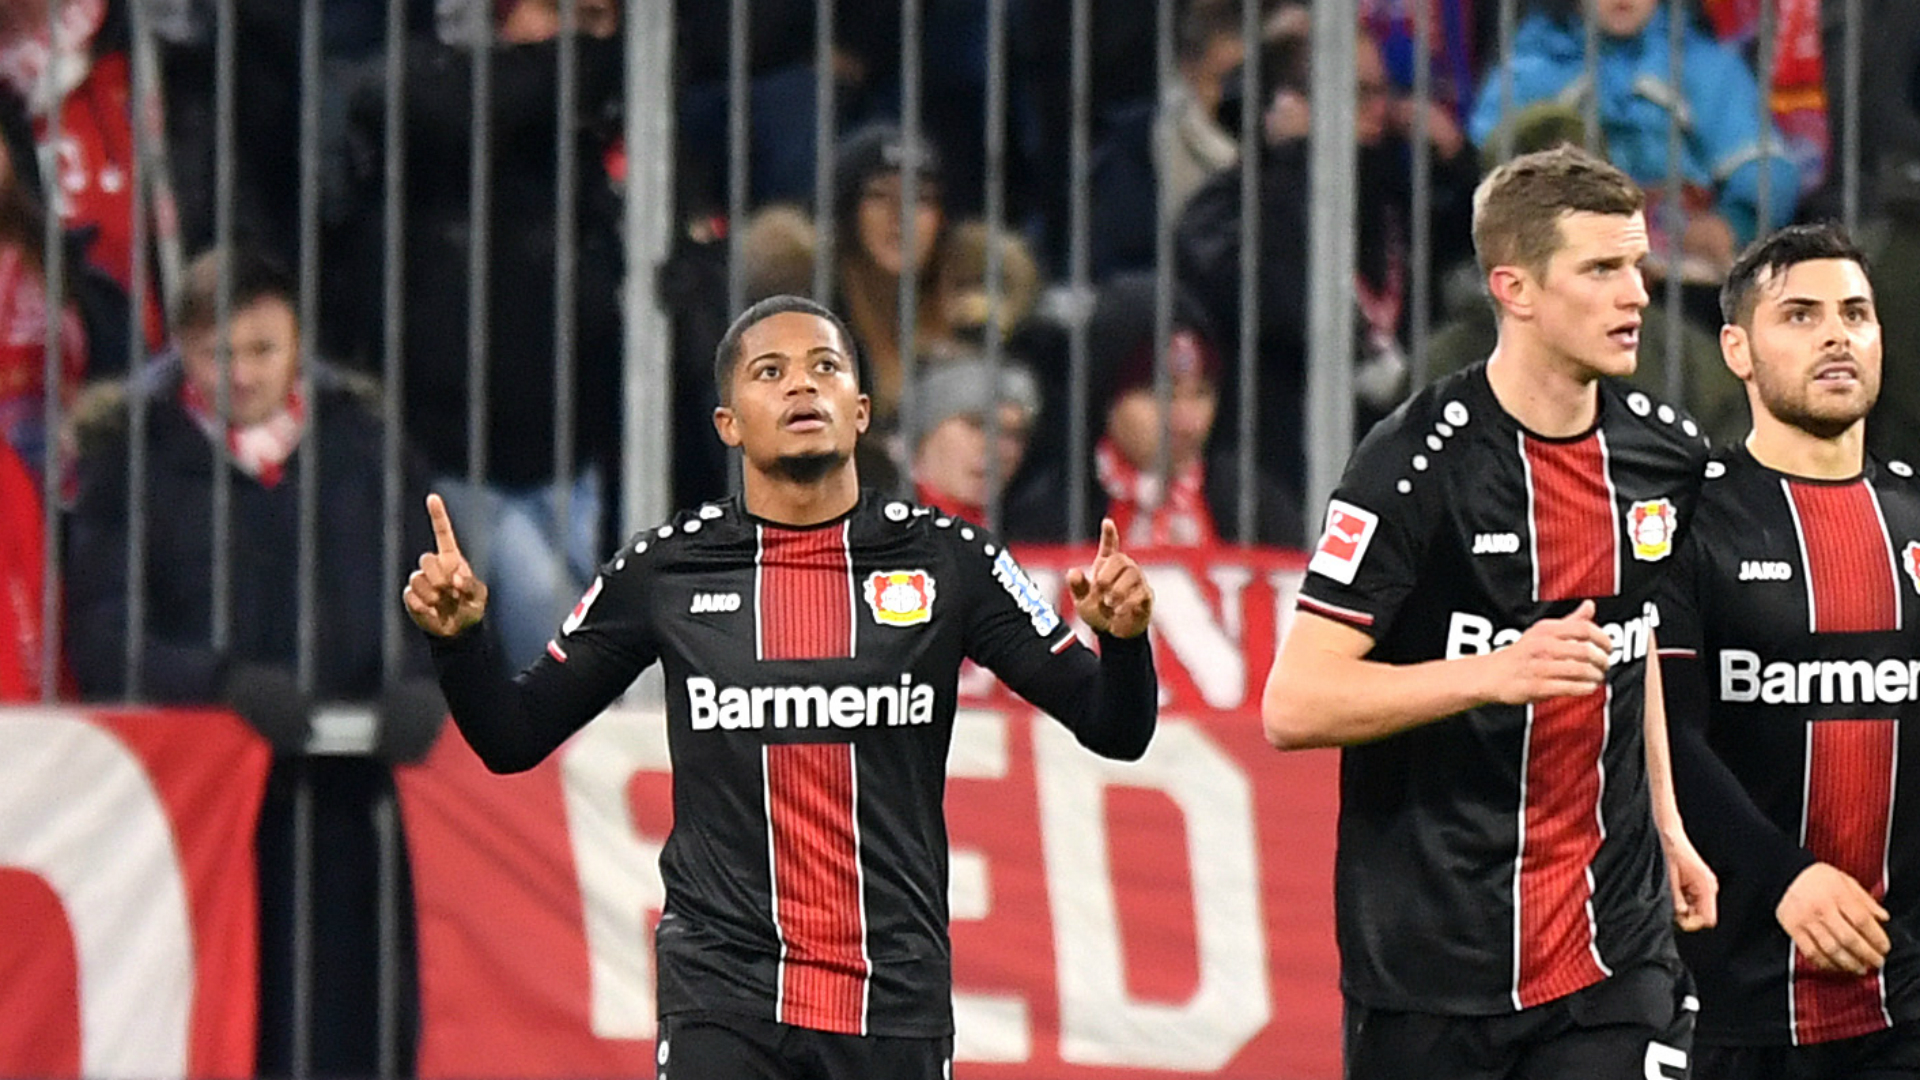 Bayern Munich 1-2 Bayer Leverkusen: Bailey double inflicts first defeat on Flick